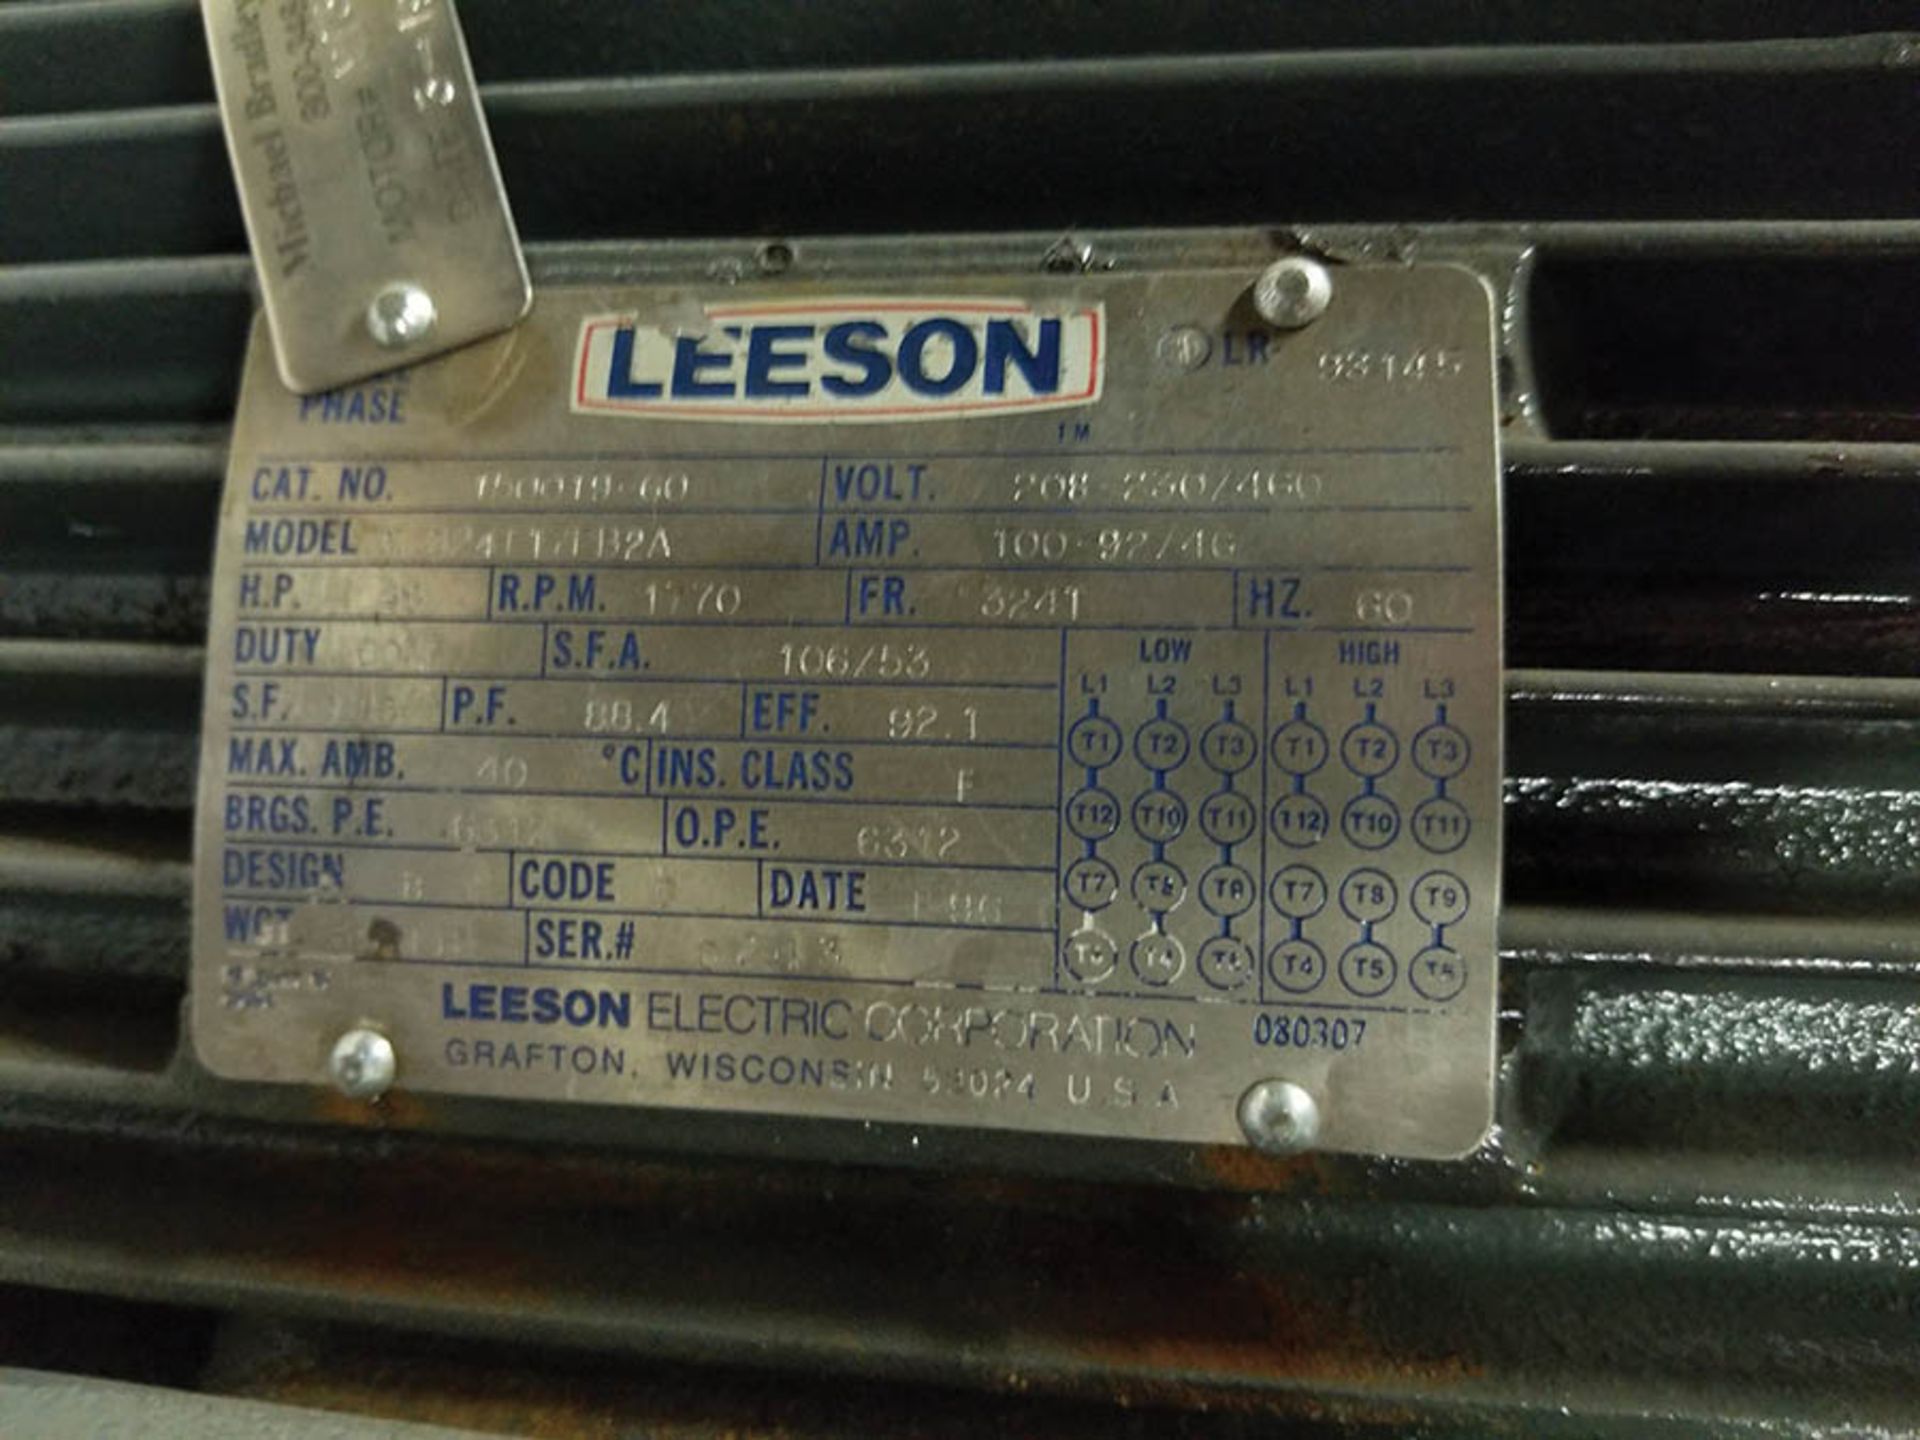 LEESON 40 HP ELECTRIC MOTOR; 1,770 RPM, 208-230/460V, 100-92/46 AMP - Image 3 of 5